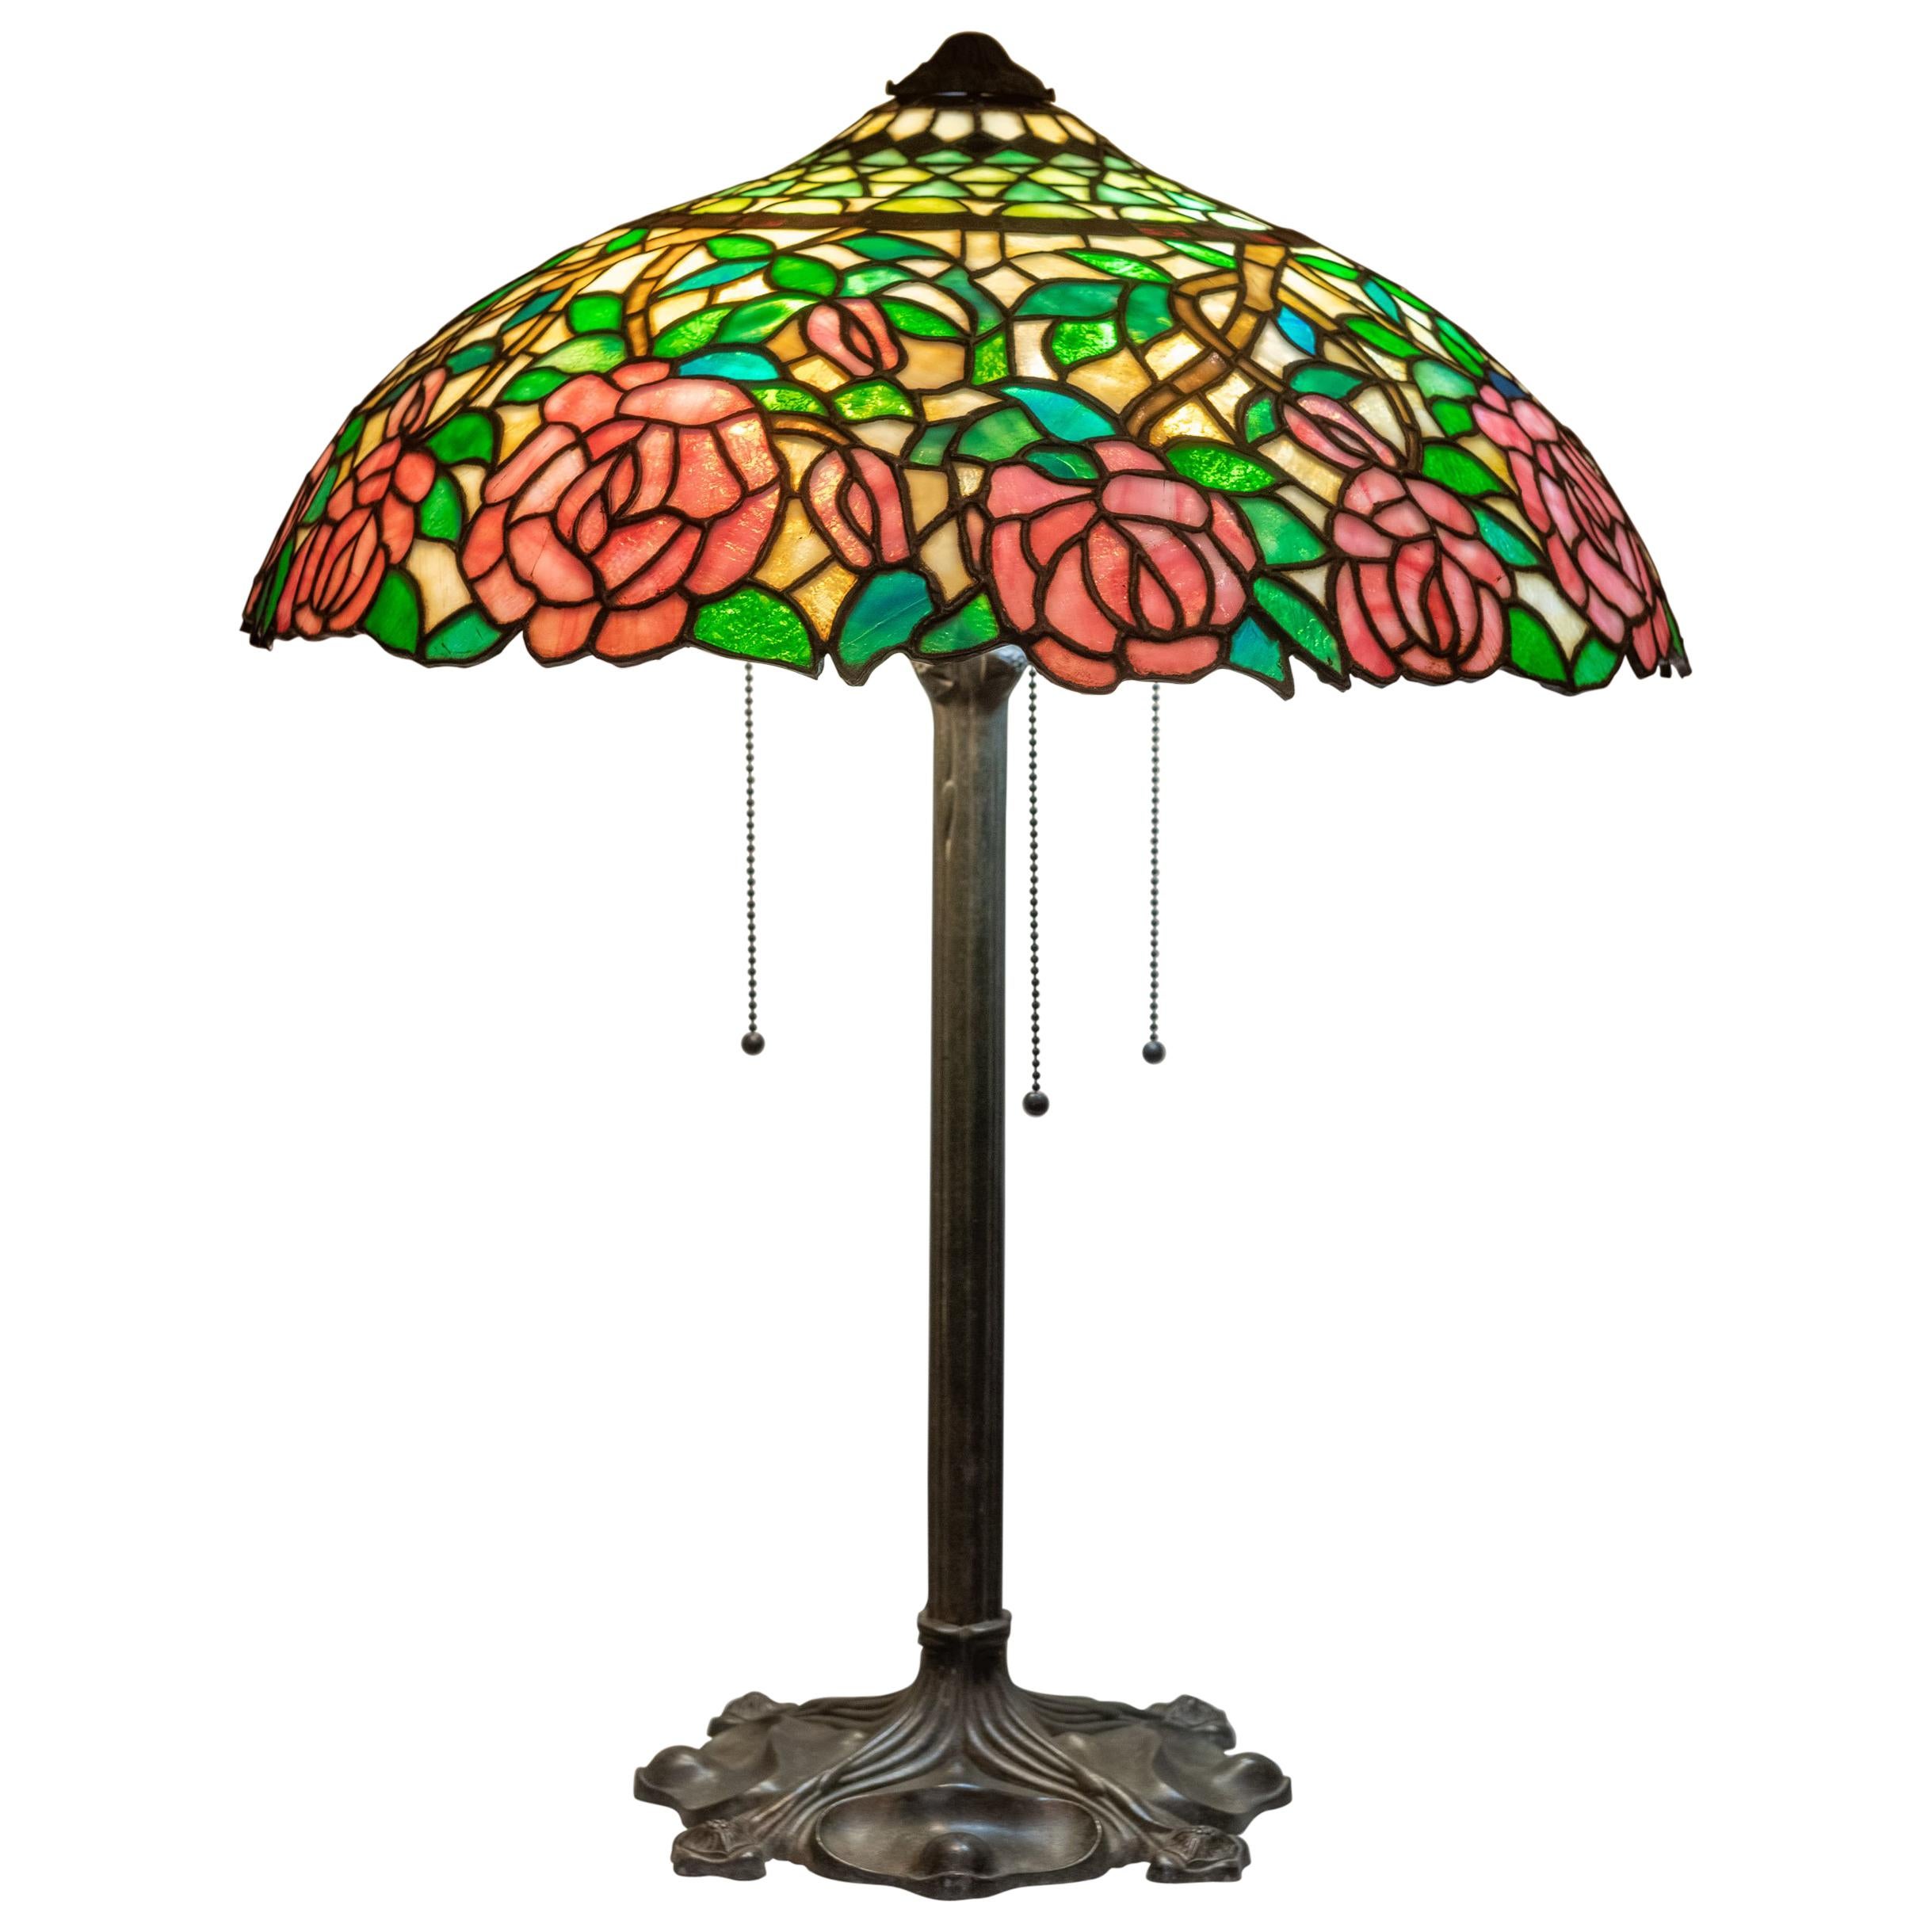 Antique American Leaded Glass Table Lamp, Full Floral Rose Pattern by Gorham